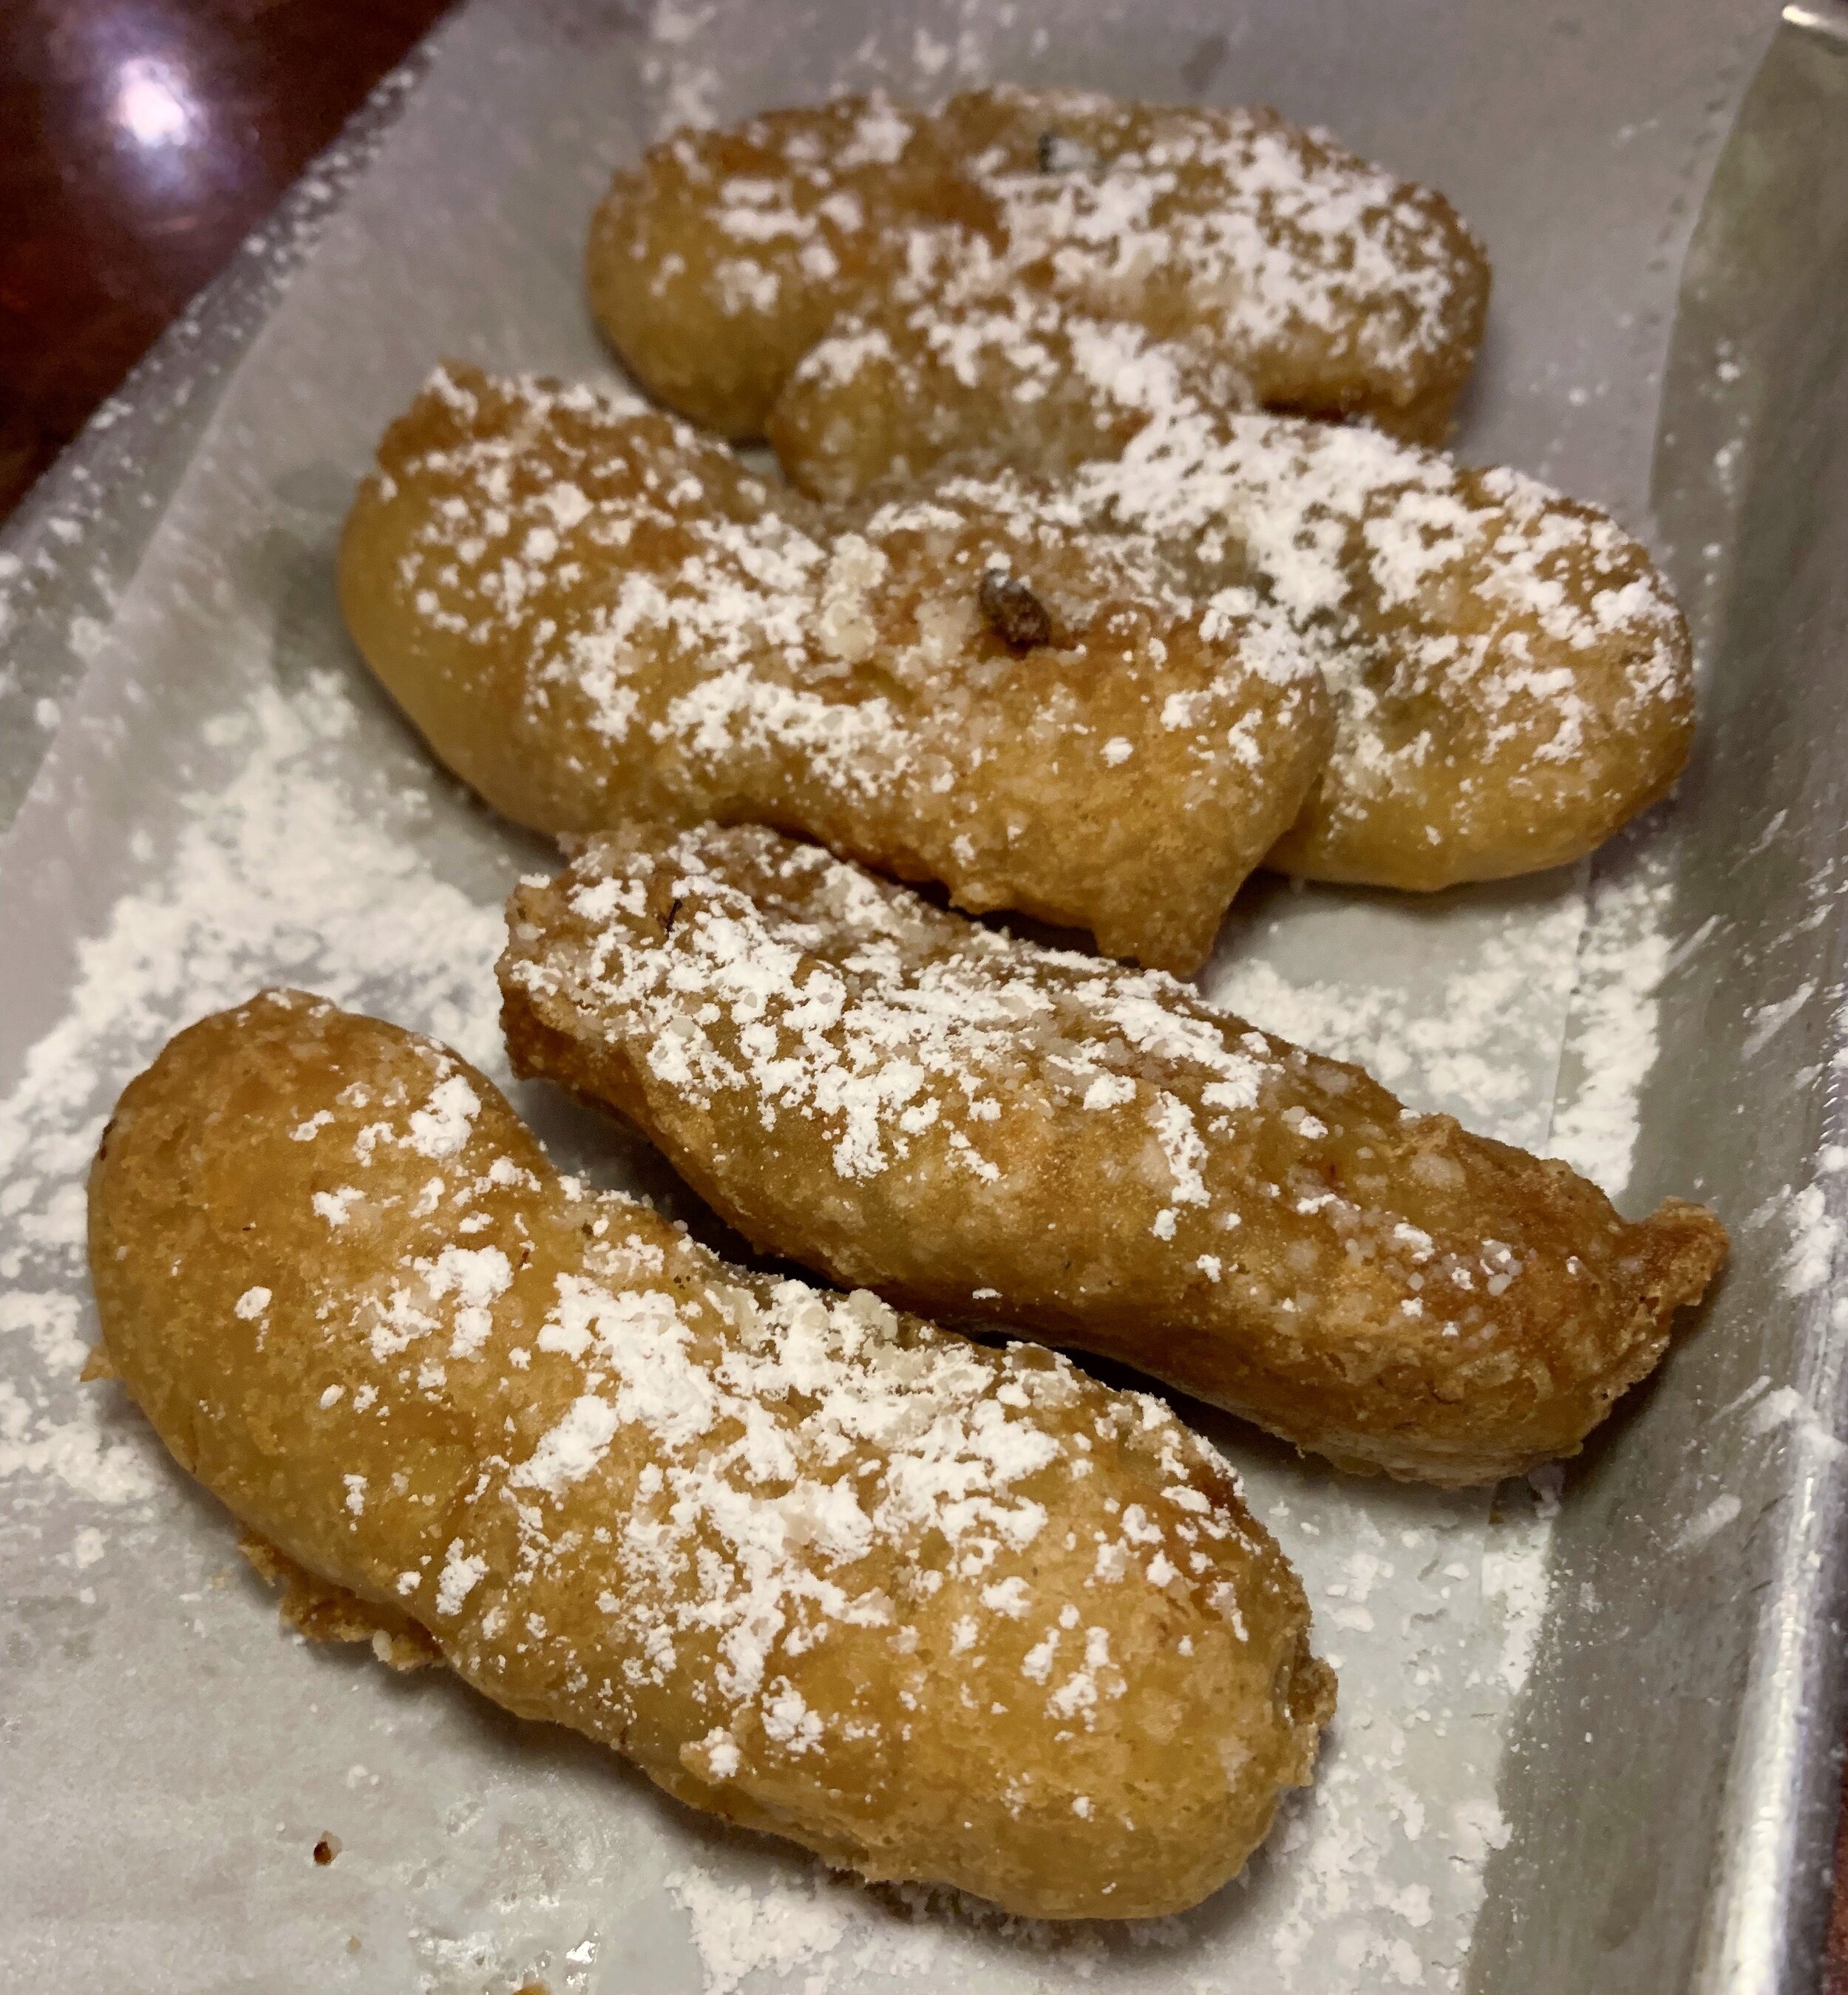 Fried bananas dusted with powdered sugar at Bar Luchador's I Can't Believe It's Vegan night